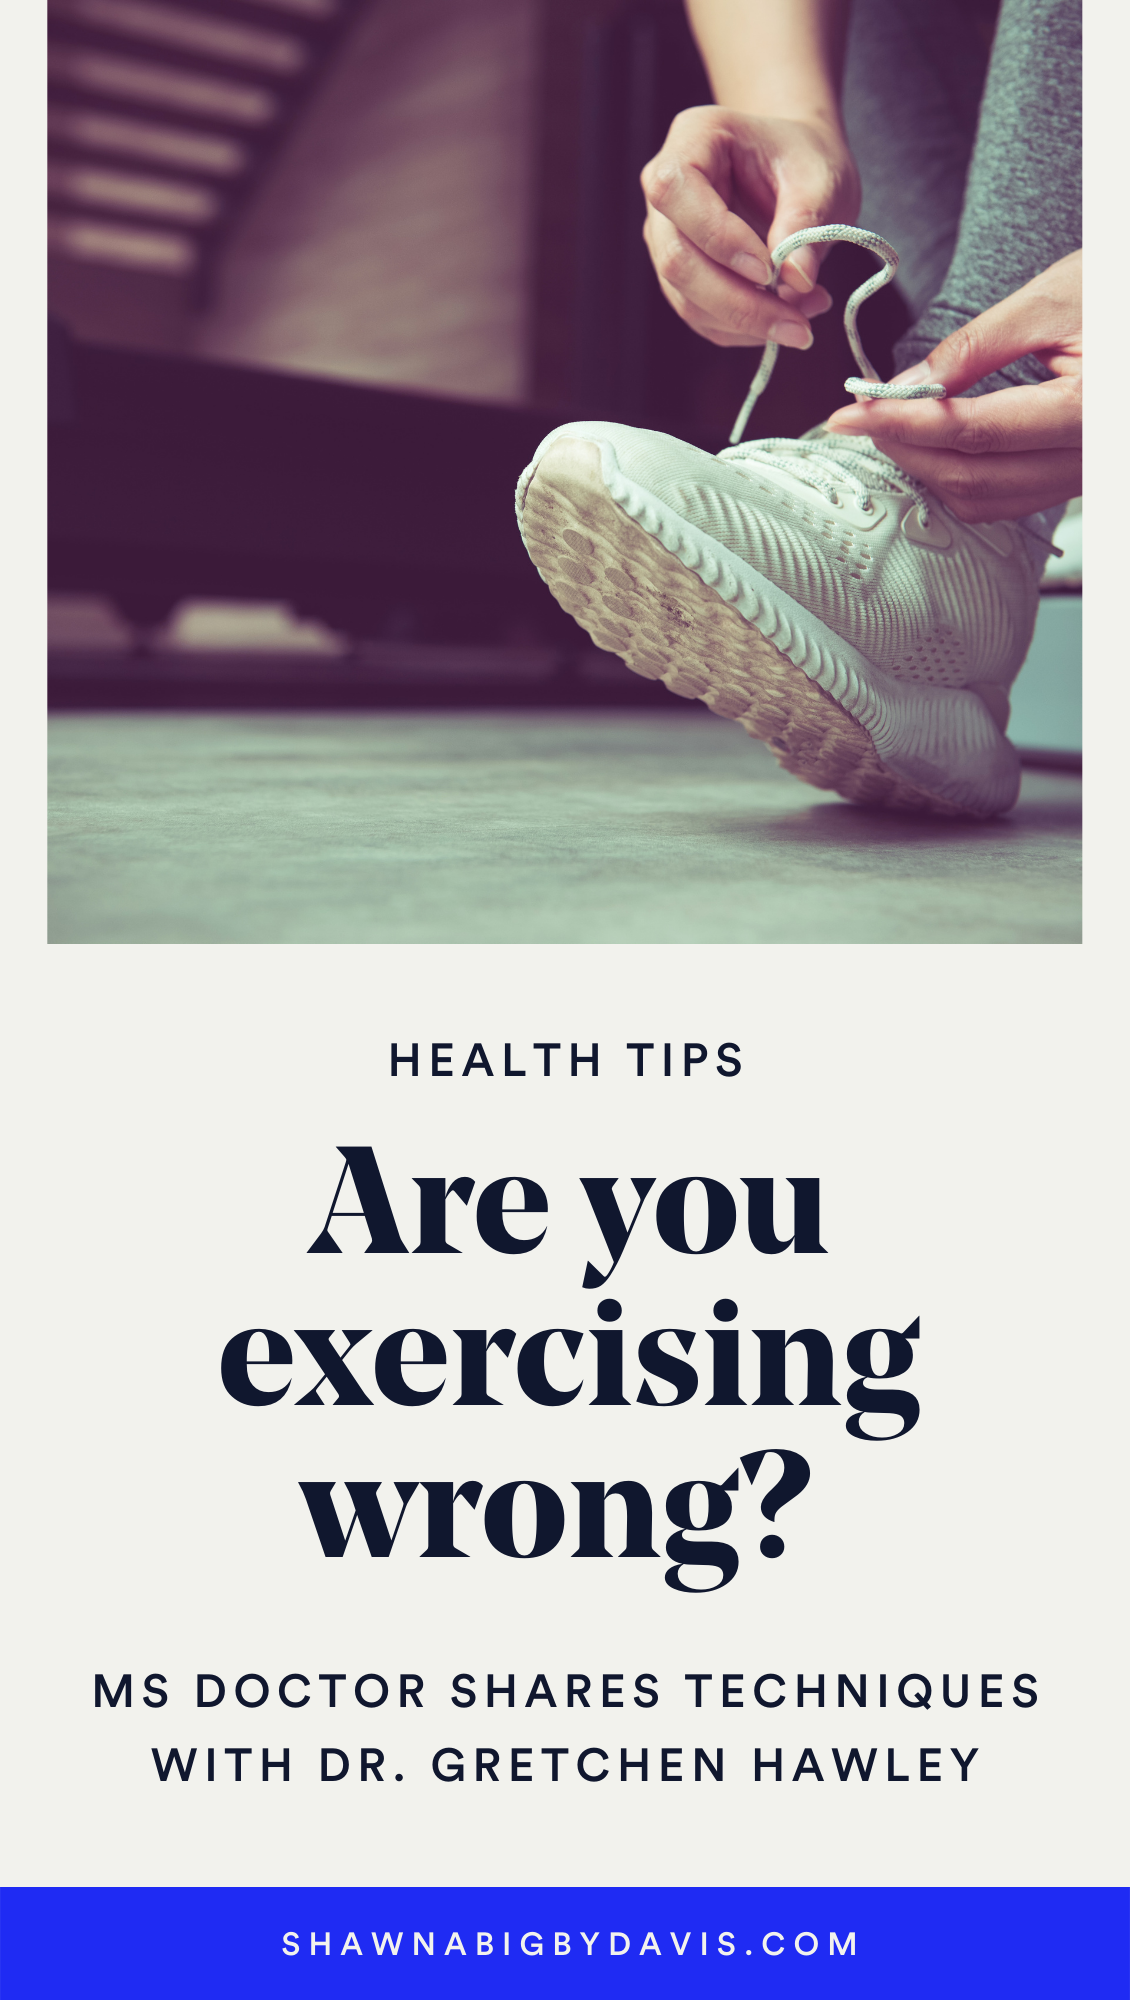 Are you exercising wrong? MS Doctor shares techniques - Shawna Bigby Davis